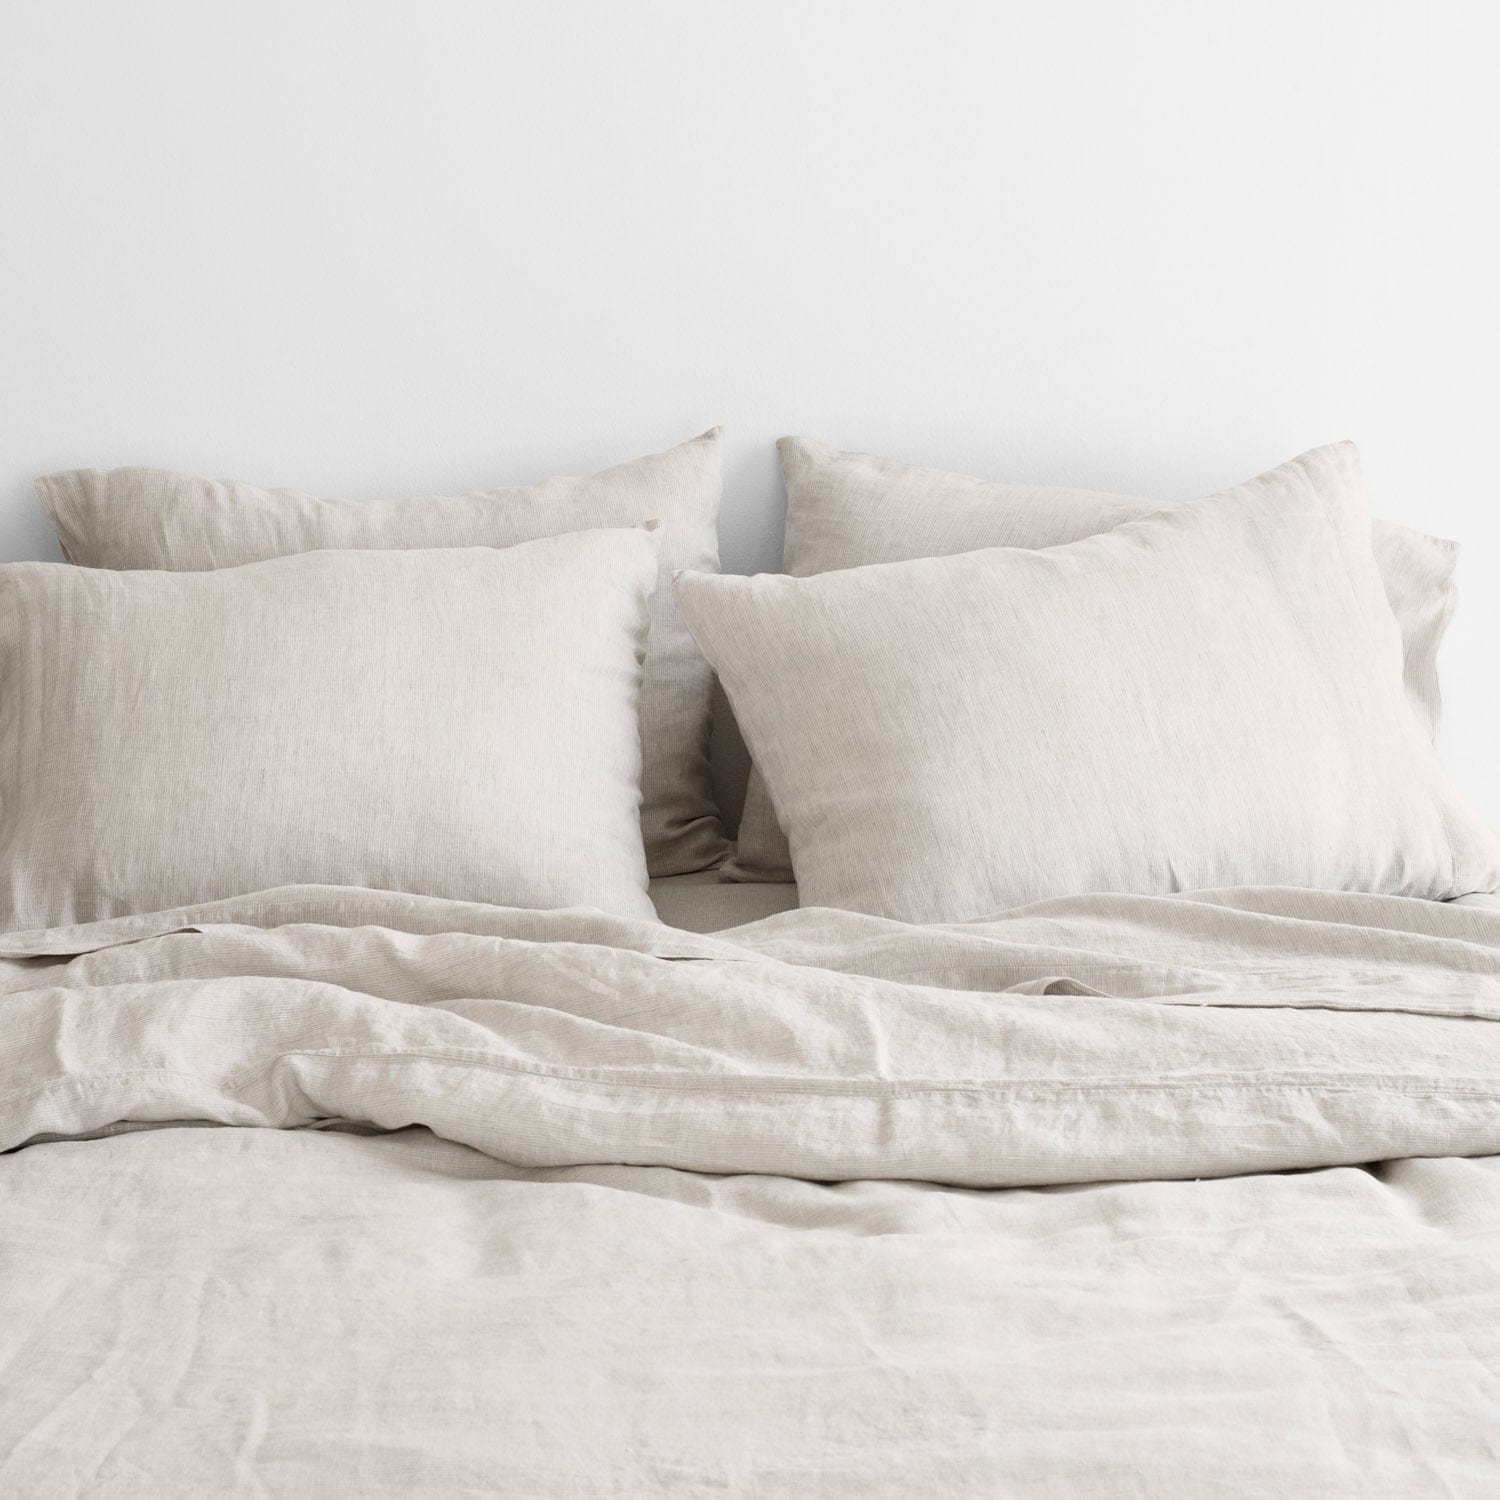 The Citizenry Stonewashed Linen Bed Bundle | Queen | Seaglass - Image 3